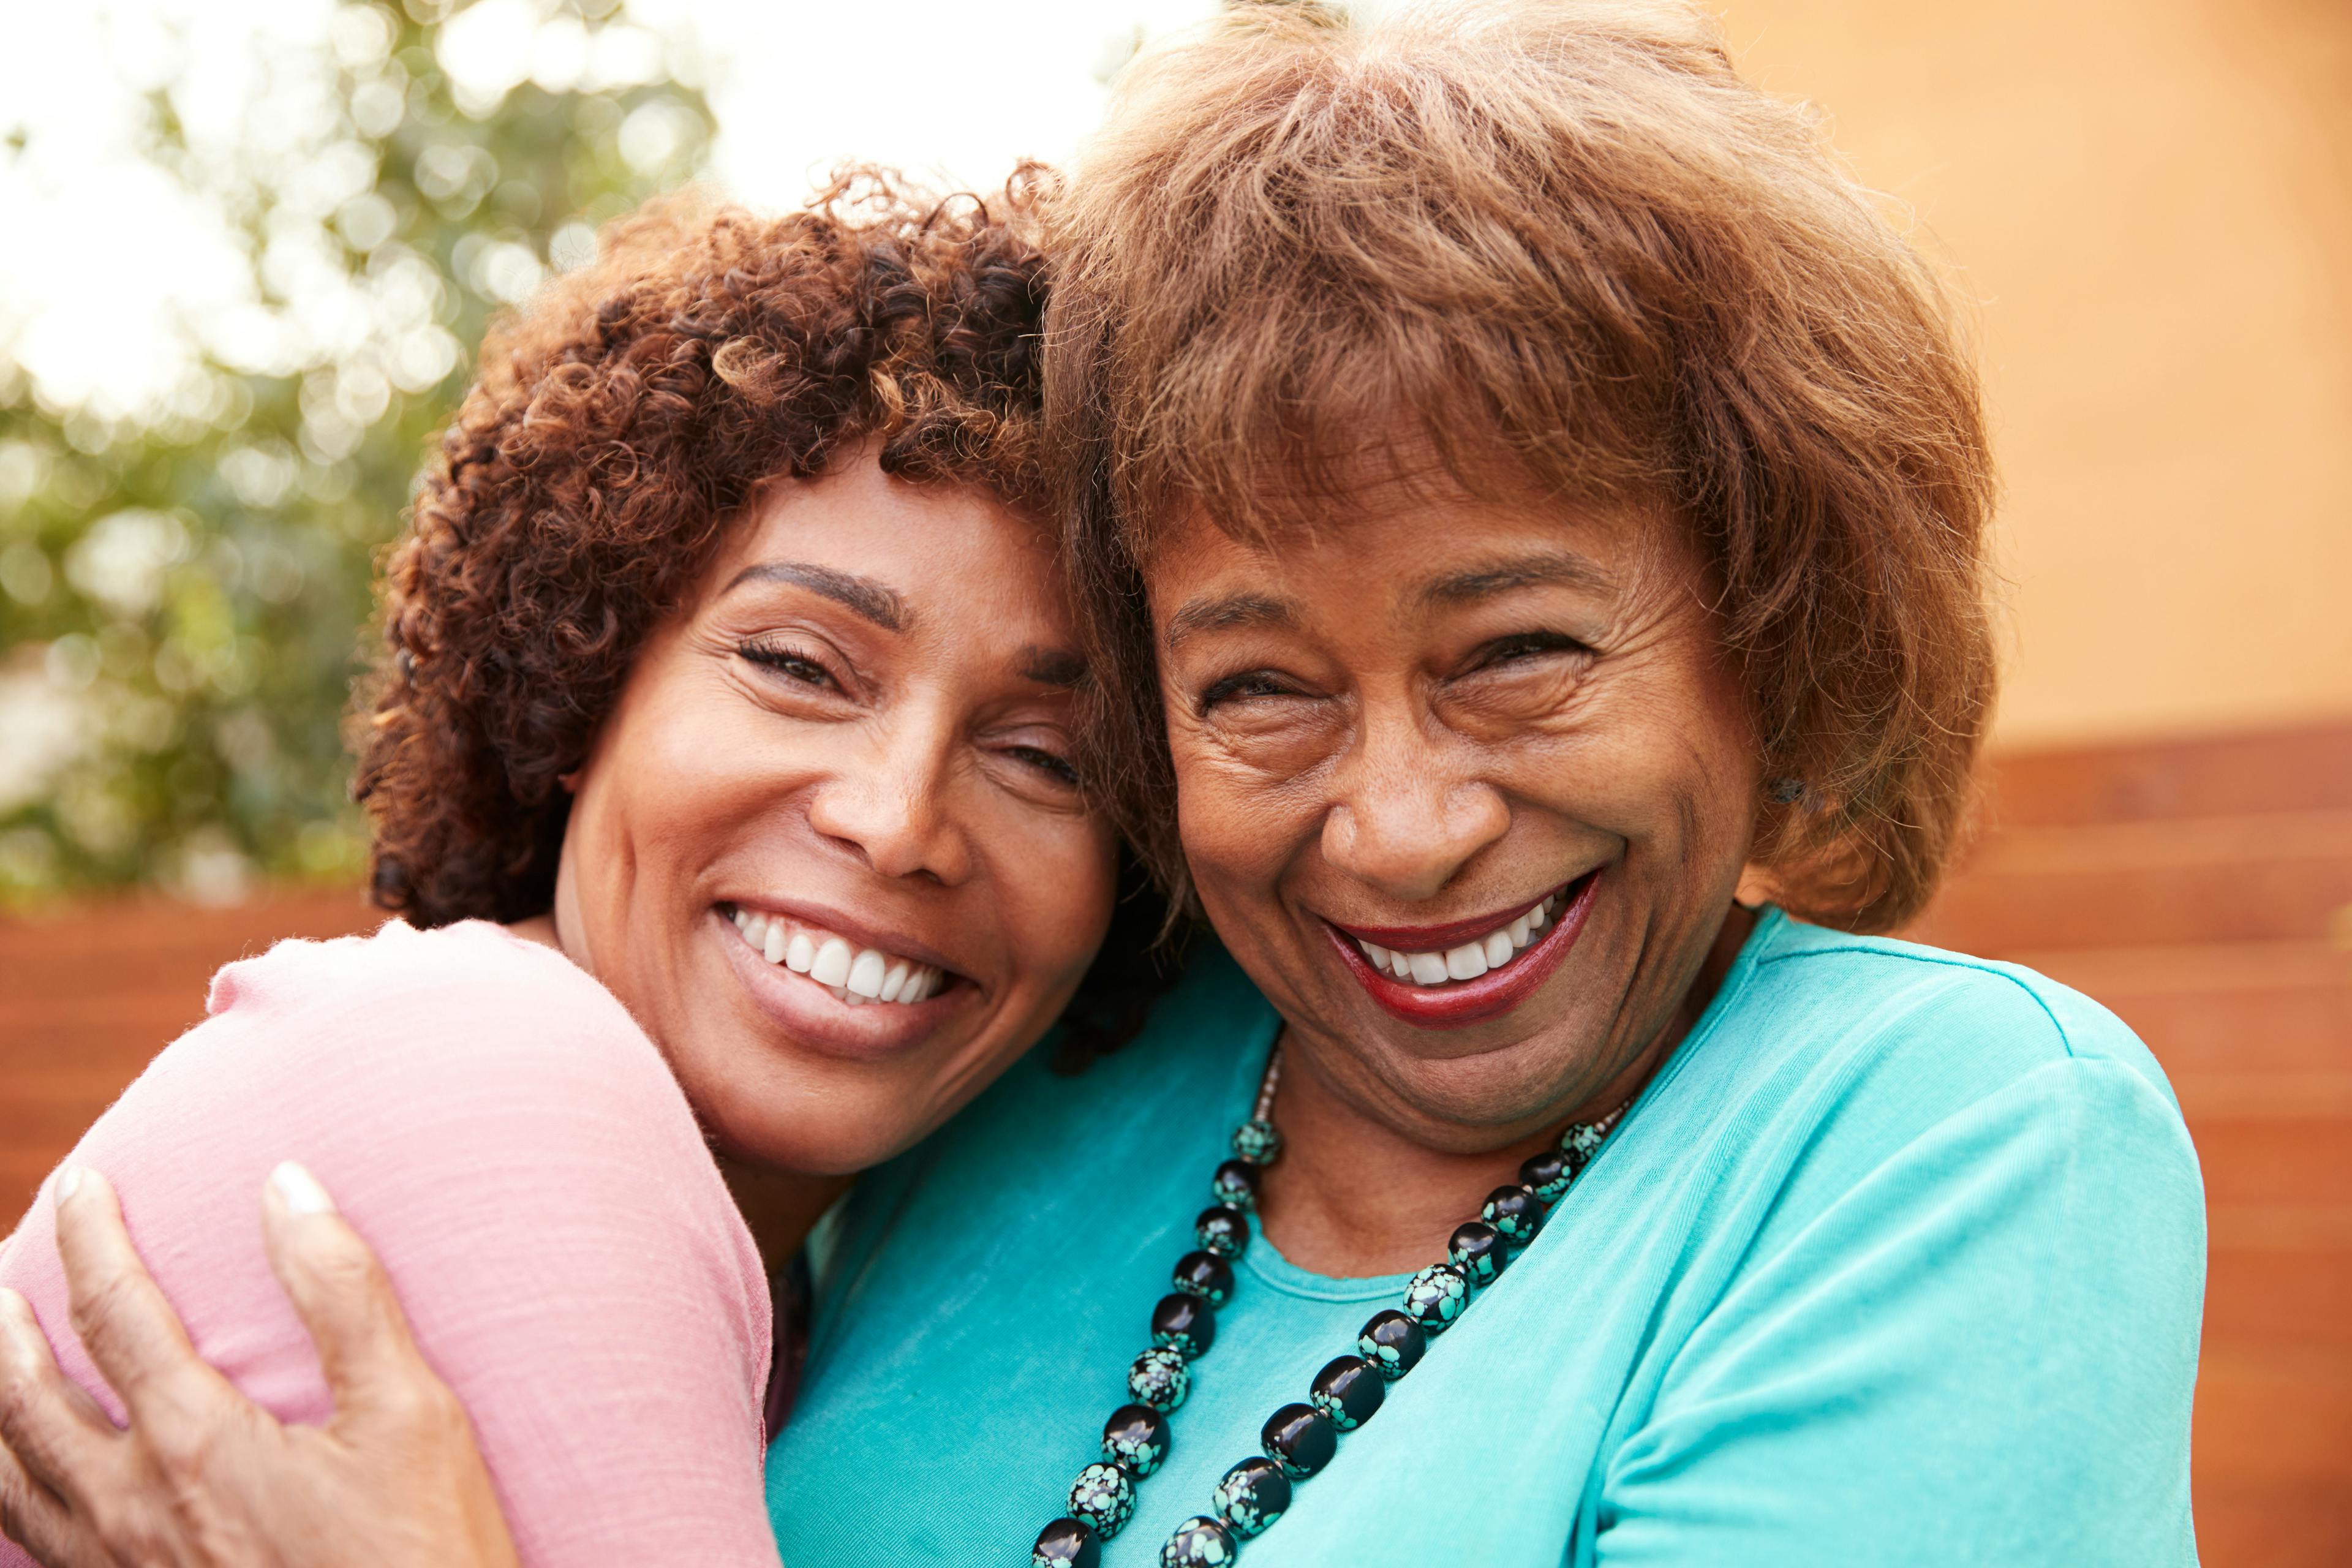 How to Care For Aging Parents